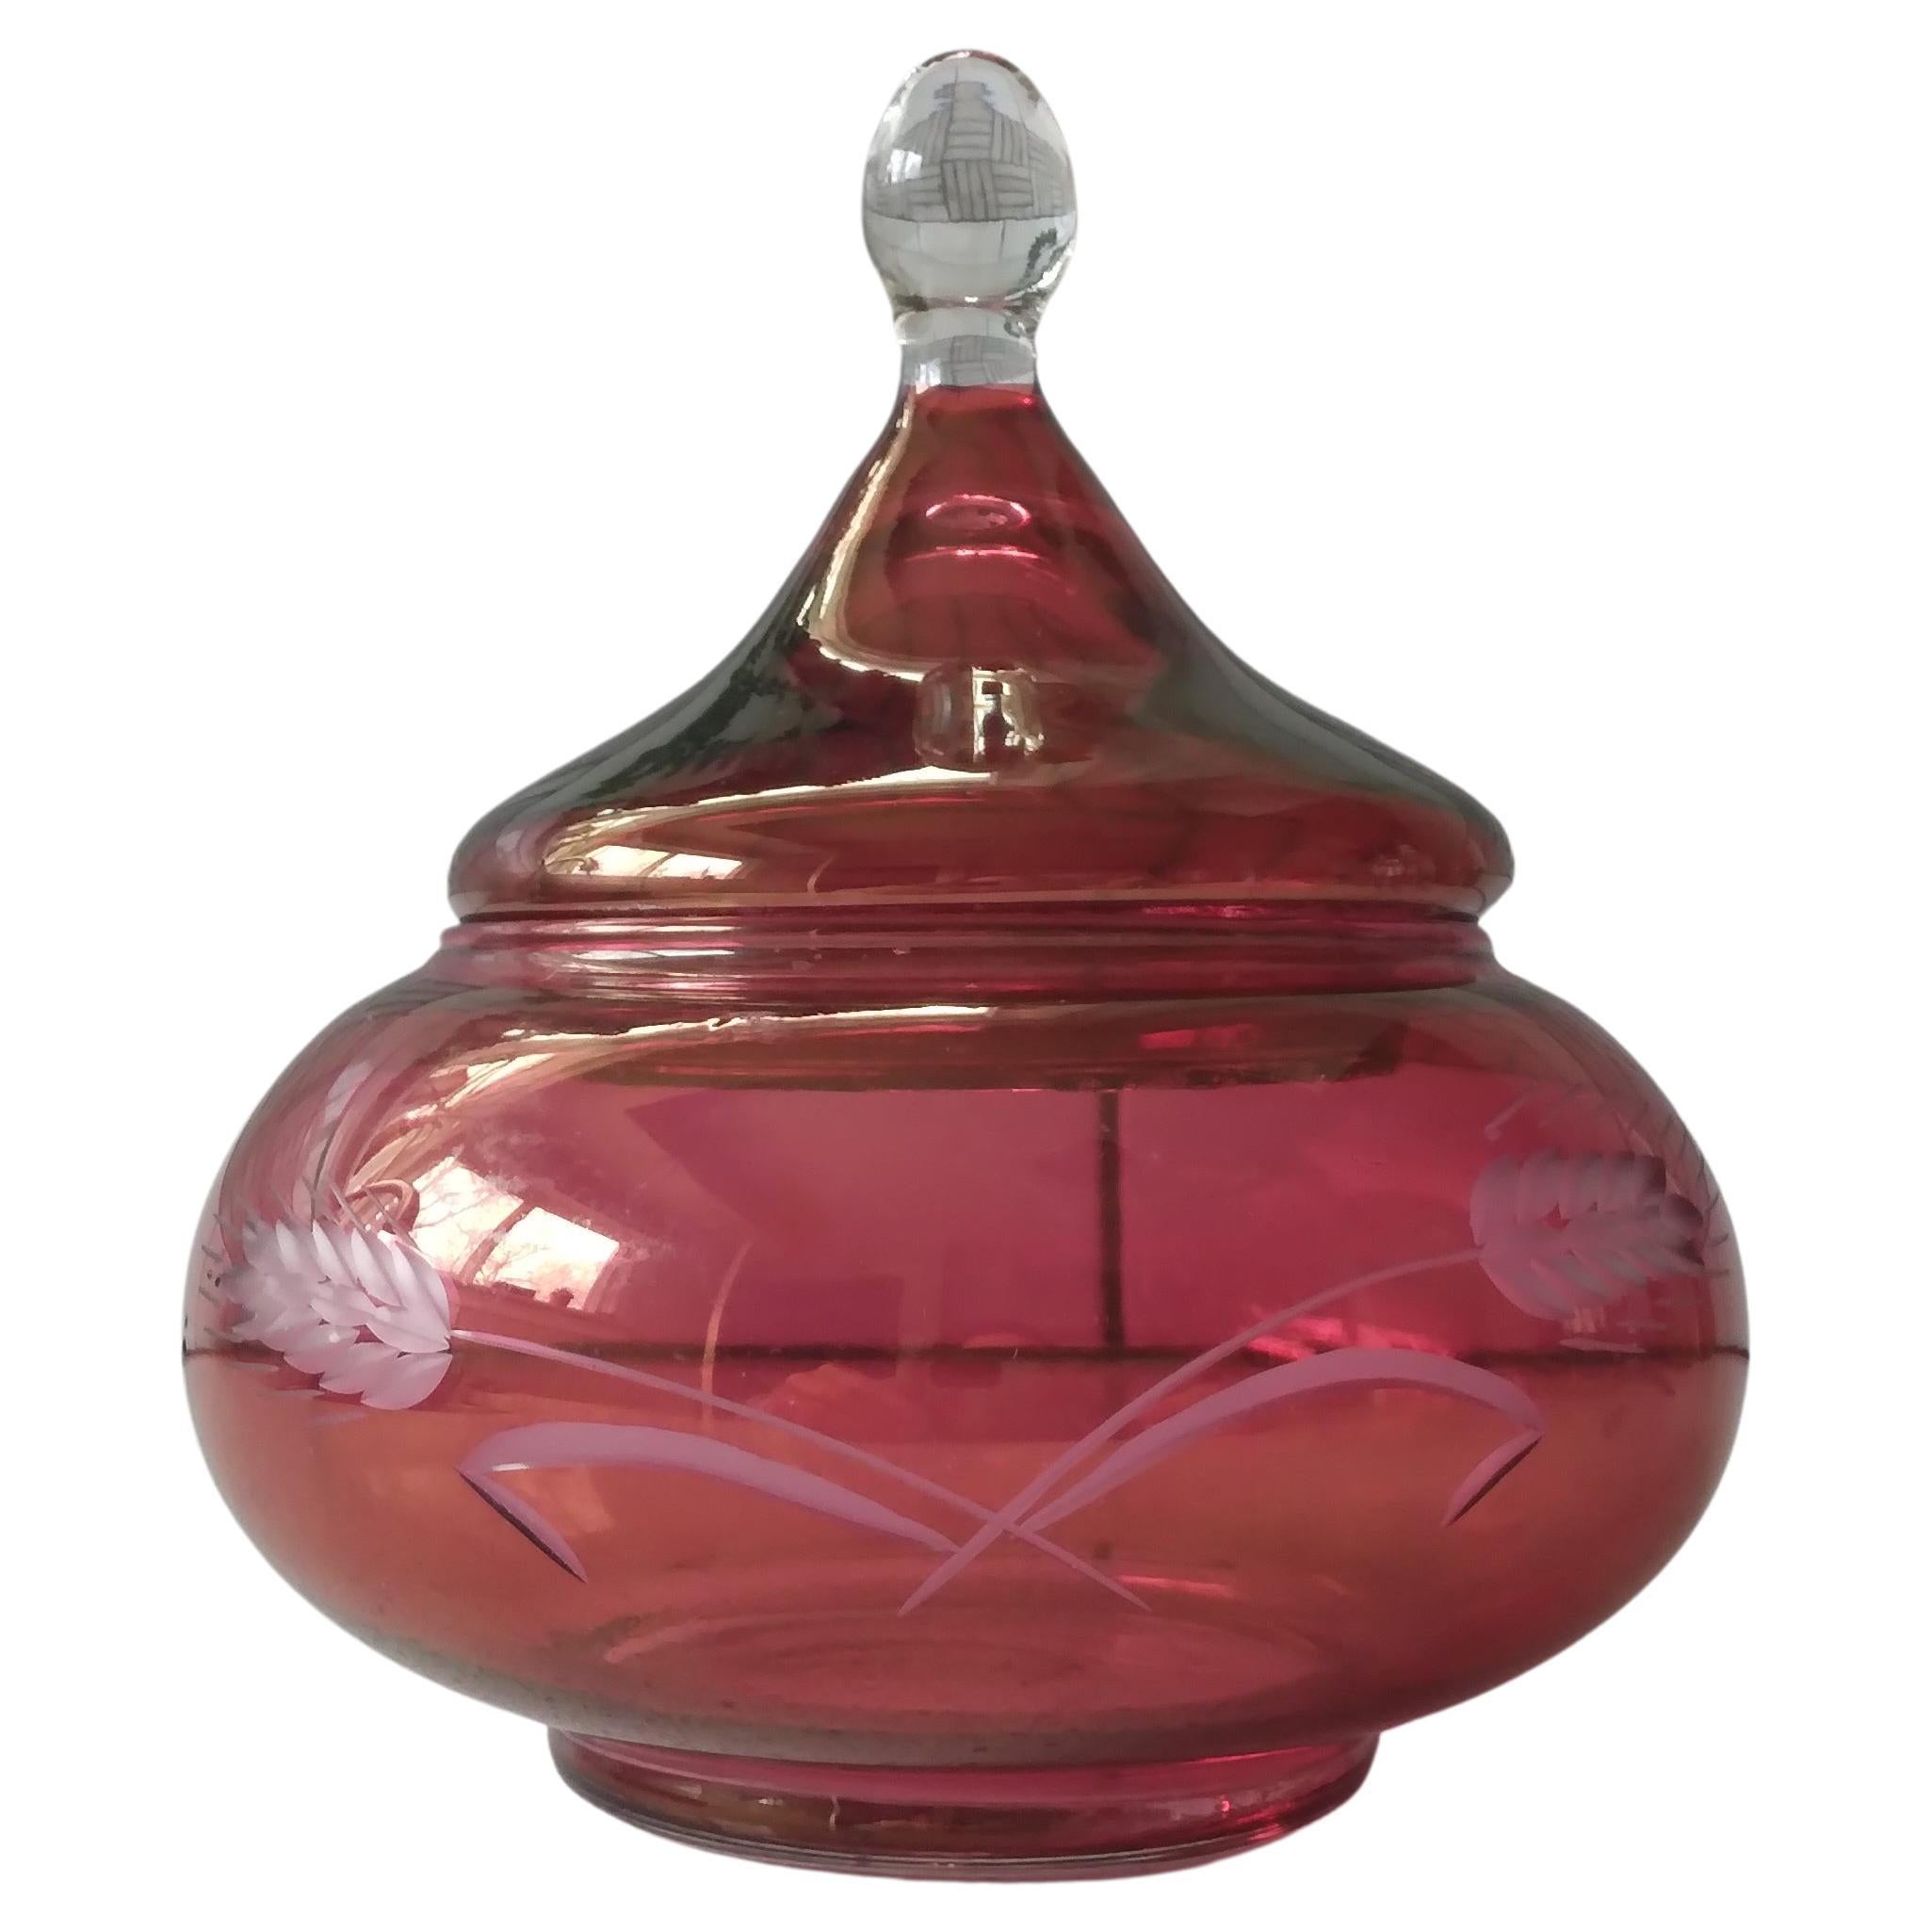 Dark Cranberry Pink Candy Dish With Lid - Wheat Design For Sale